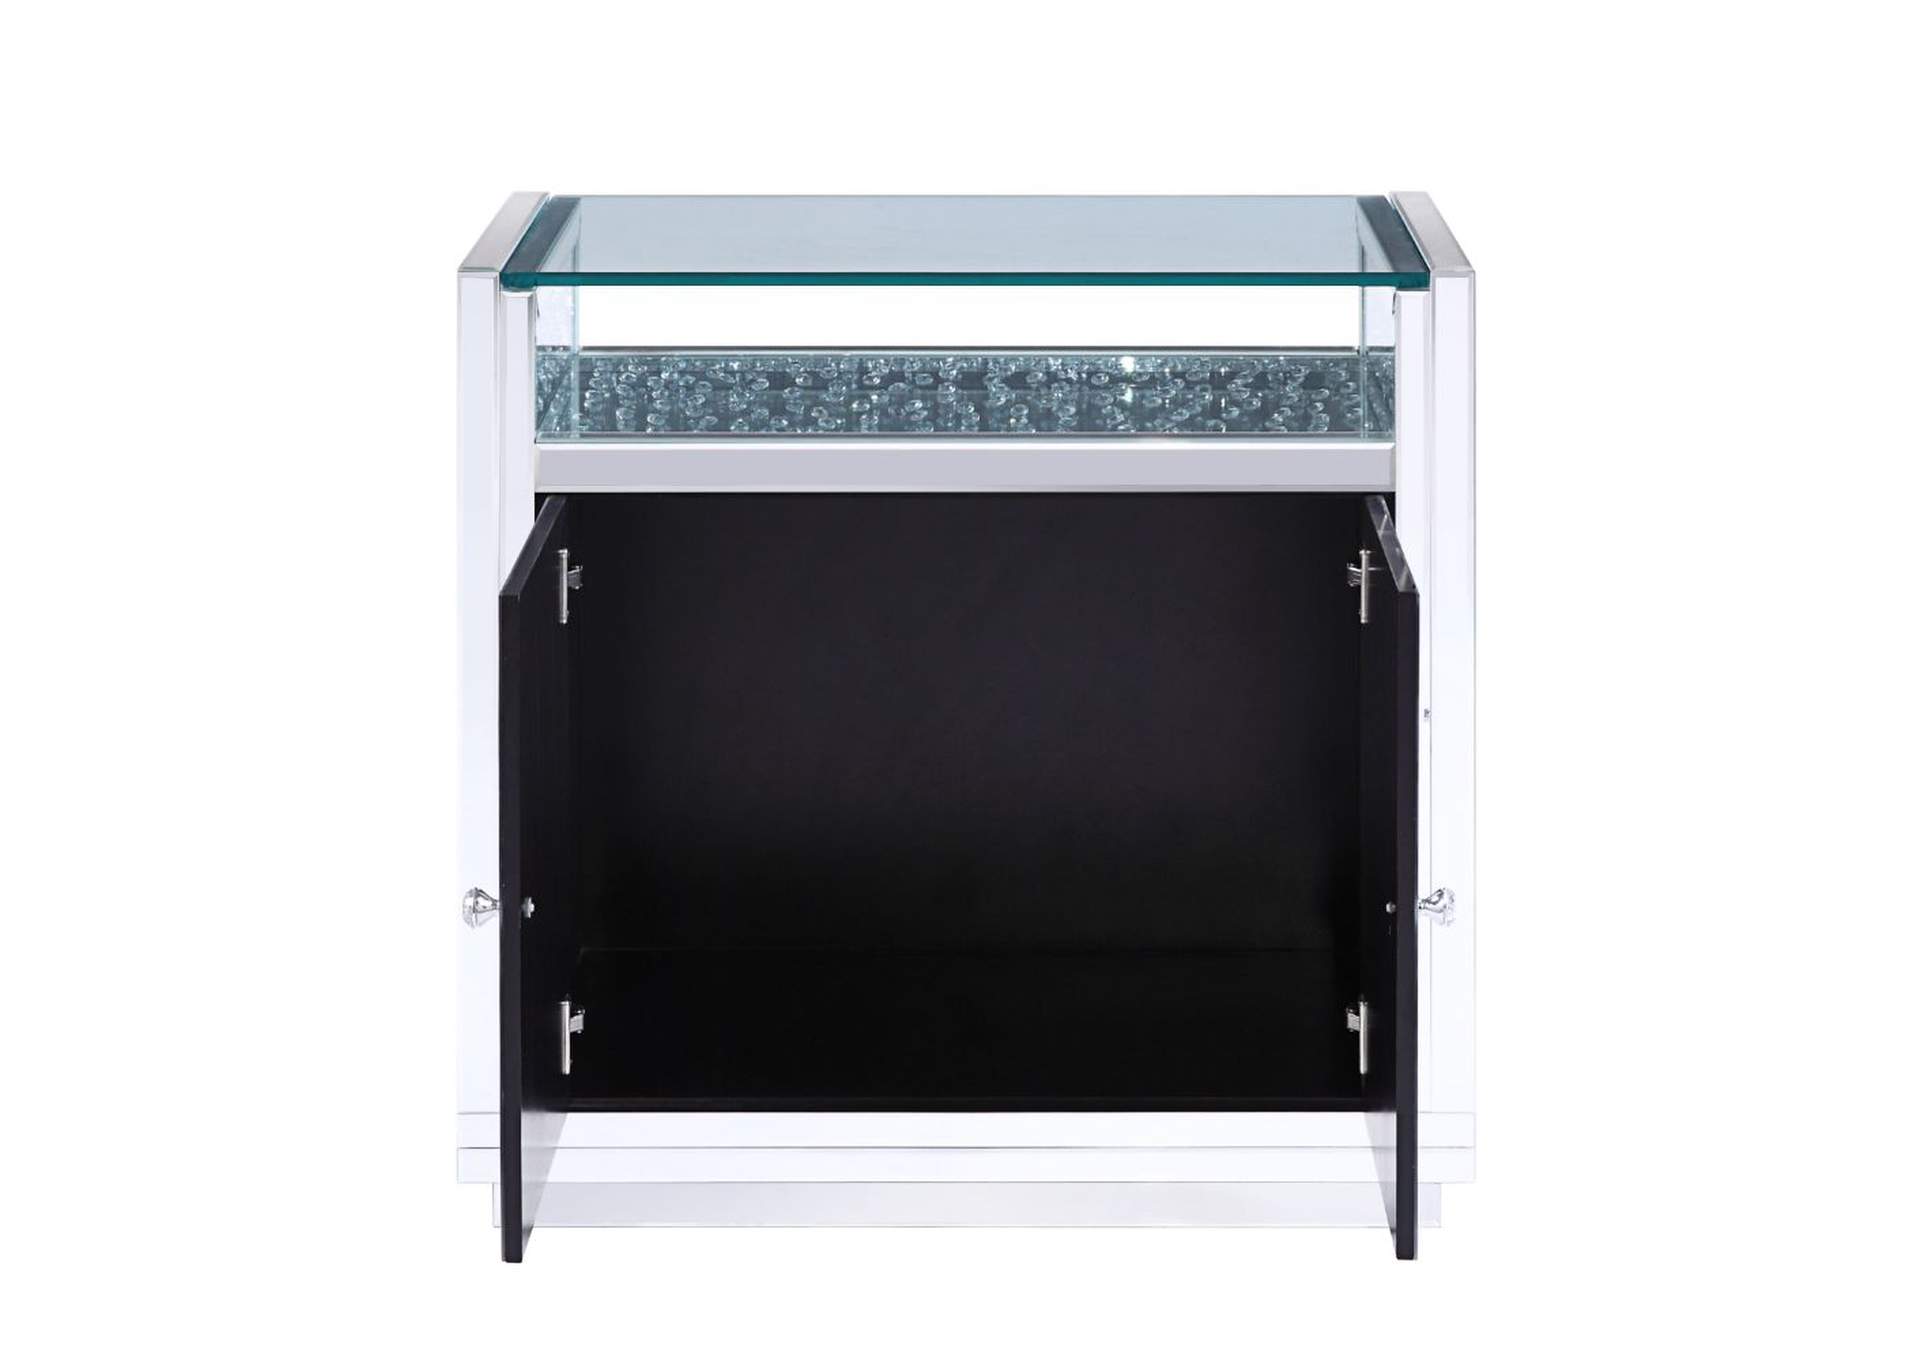 Nysa Mirrored & Faux Crystals Accent Table,Acme